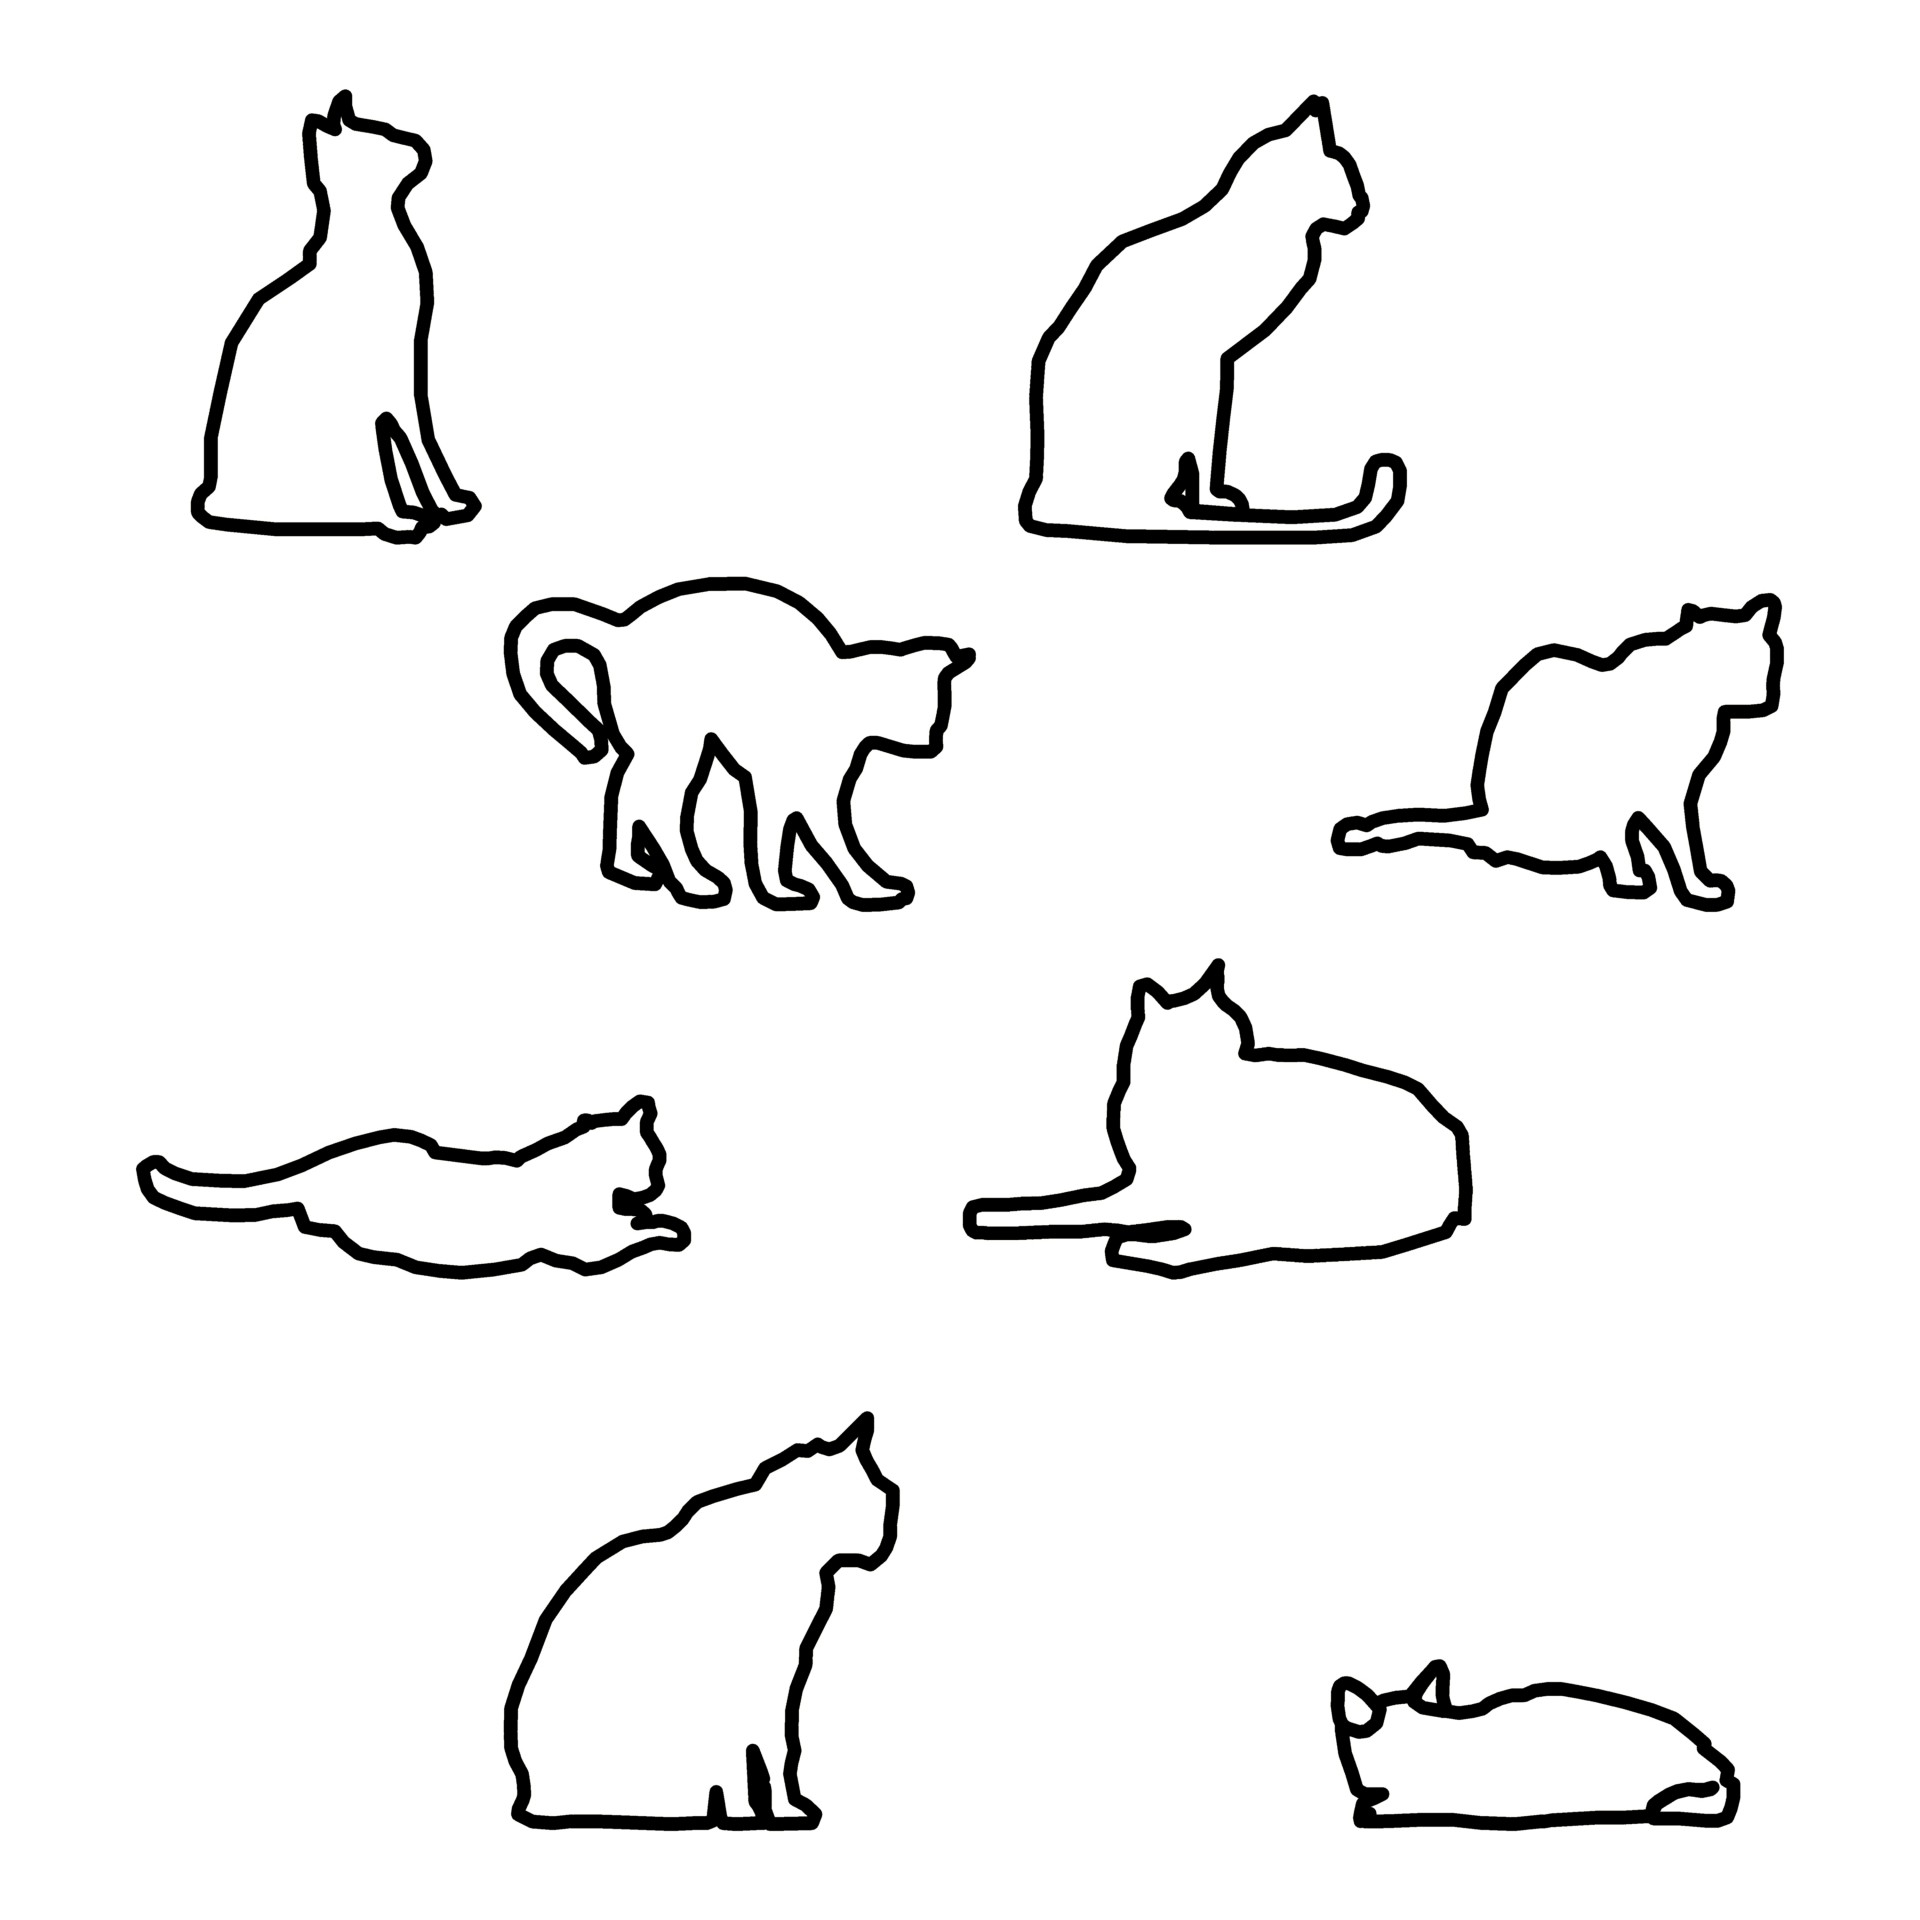 How to Draw a Cat Using Simple Shapes